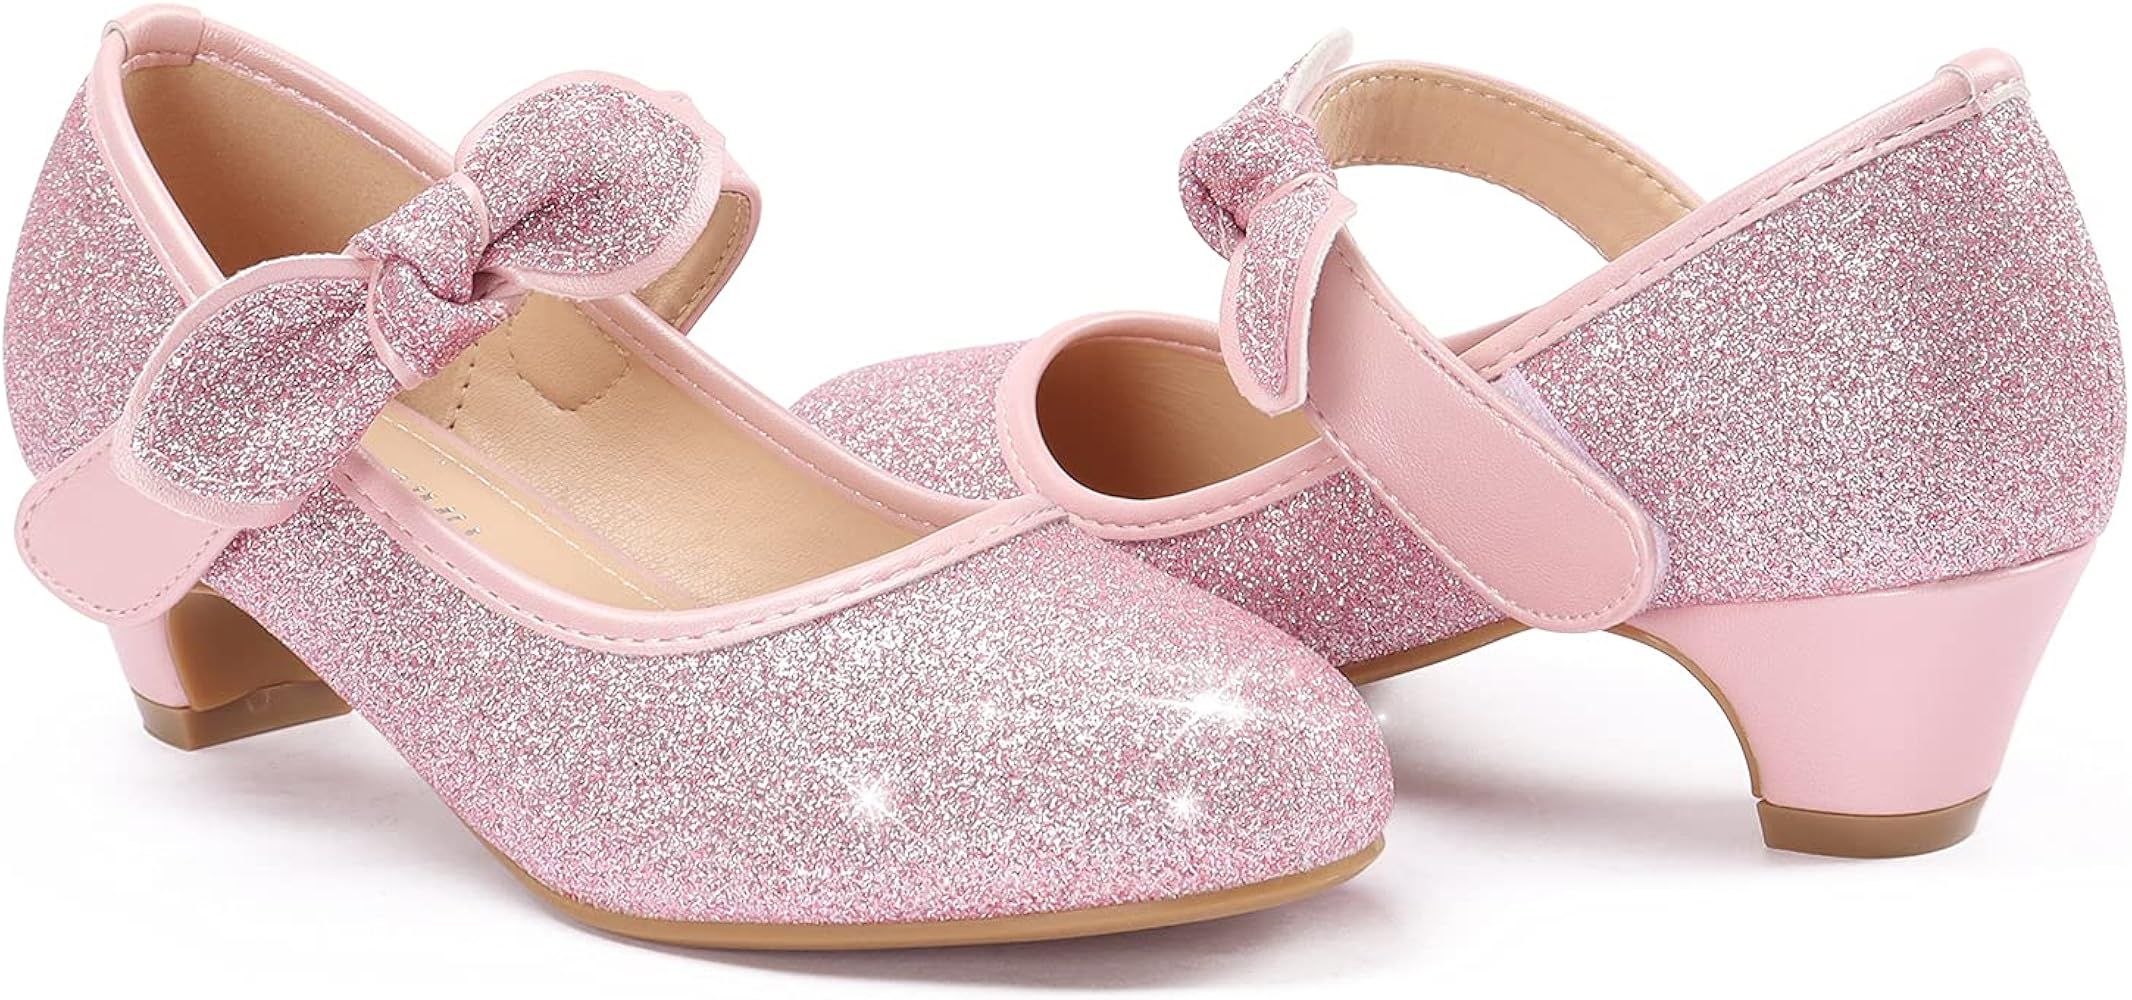 ADAMUMU Girls Dress Shoes Princess High Heel Mary Jane Glitter Shoes in Wedding Party for Toddler... | Amazon (US)